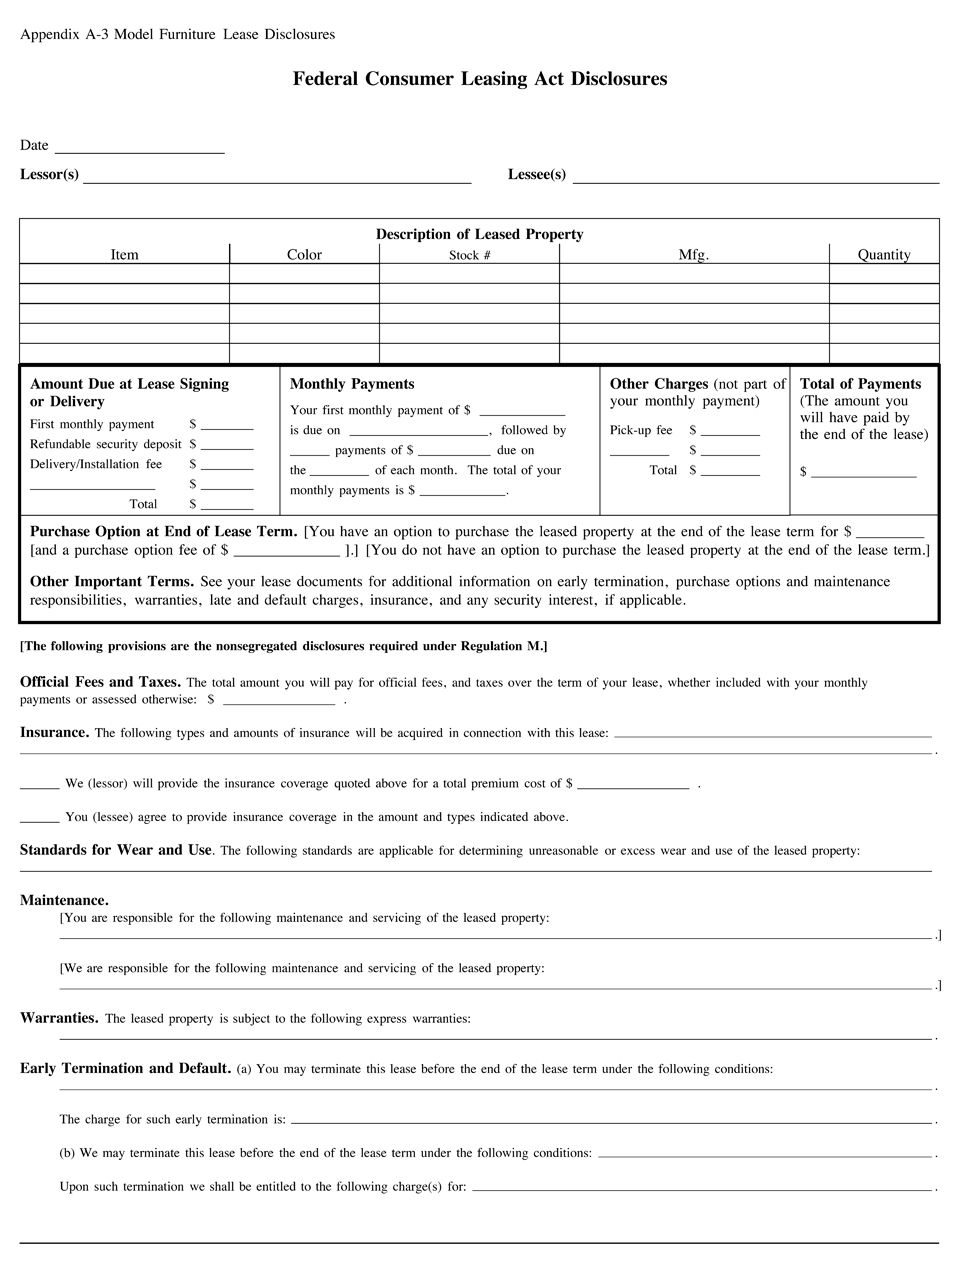 A-3—Model Furniture Lease Disclosures Page 1